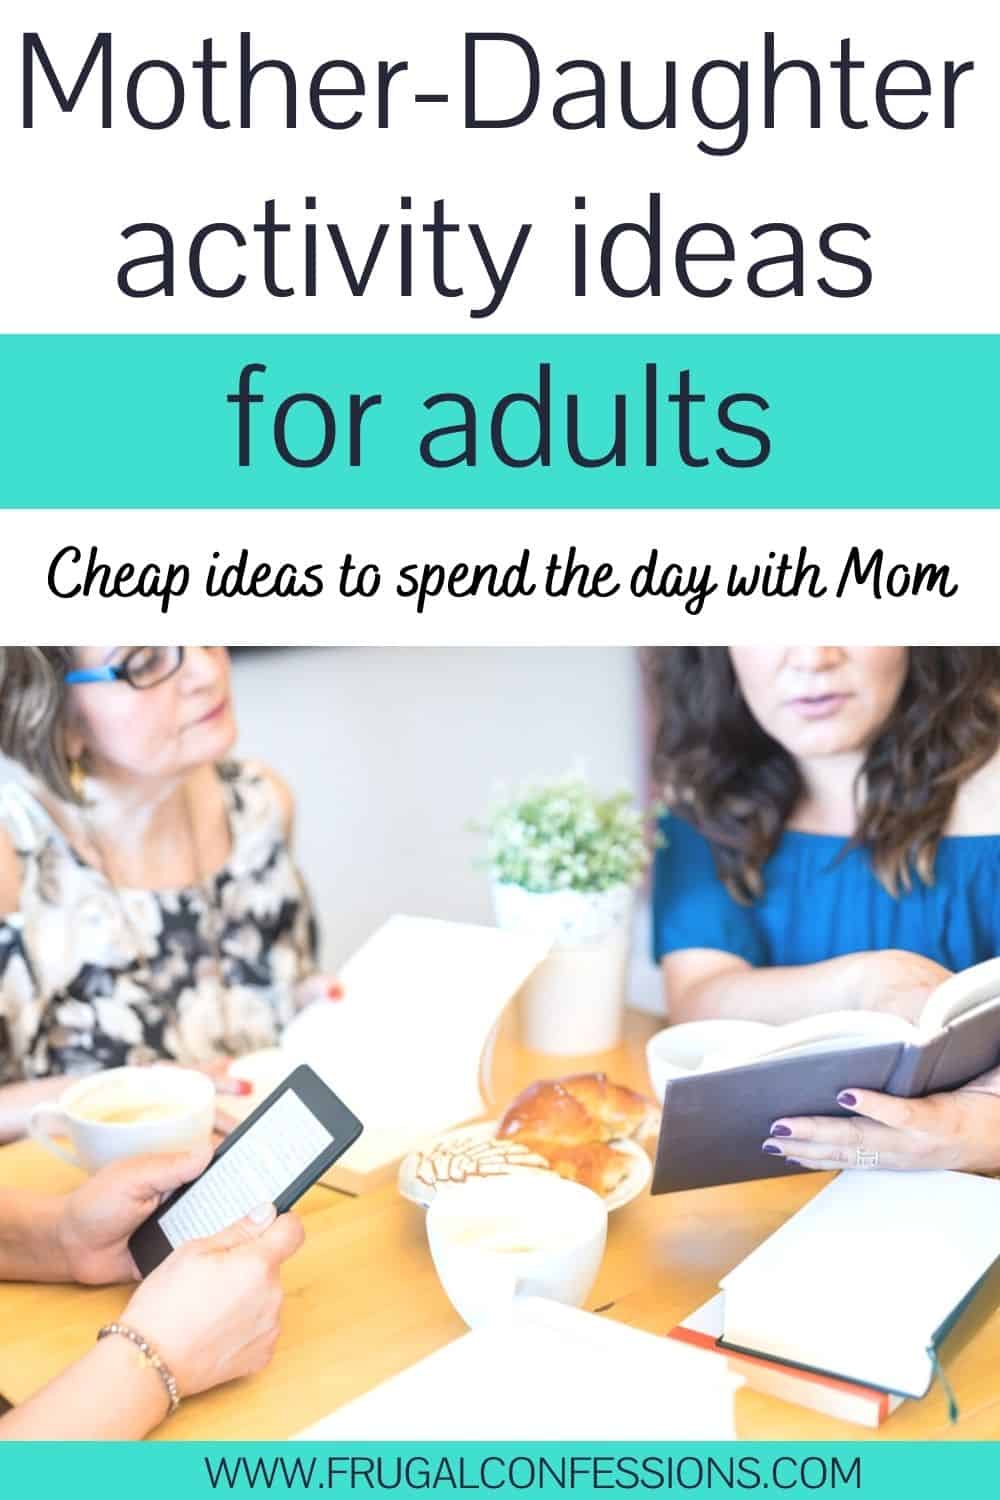 adult daughter and mother doing book club together, text overlay" mother daughter activity ideas for adults"